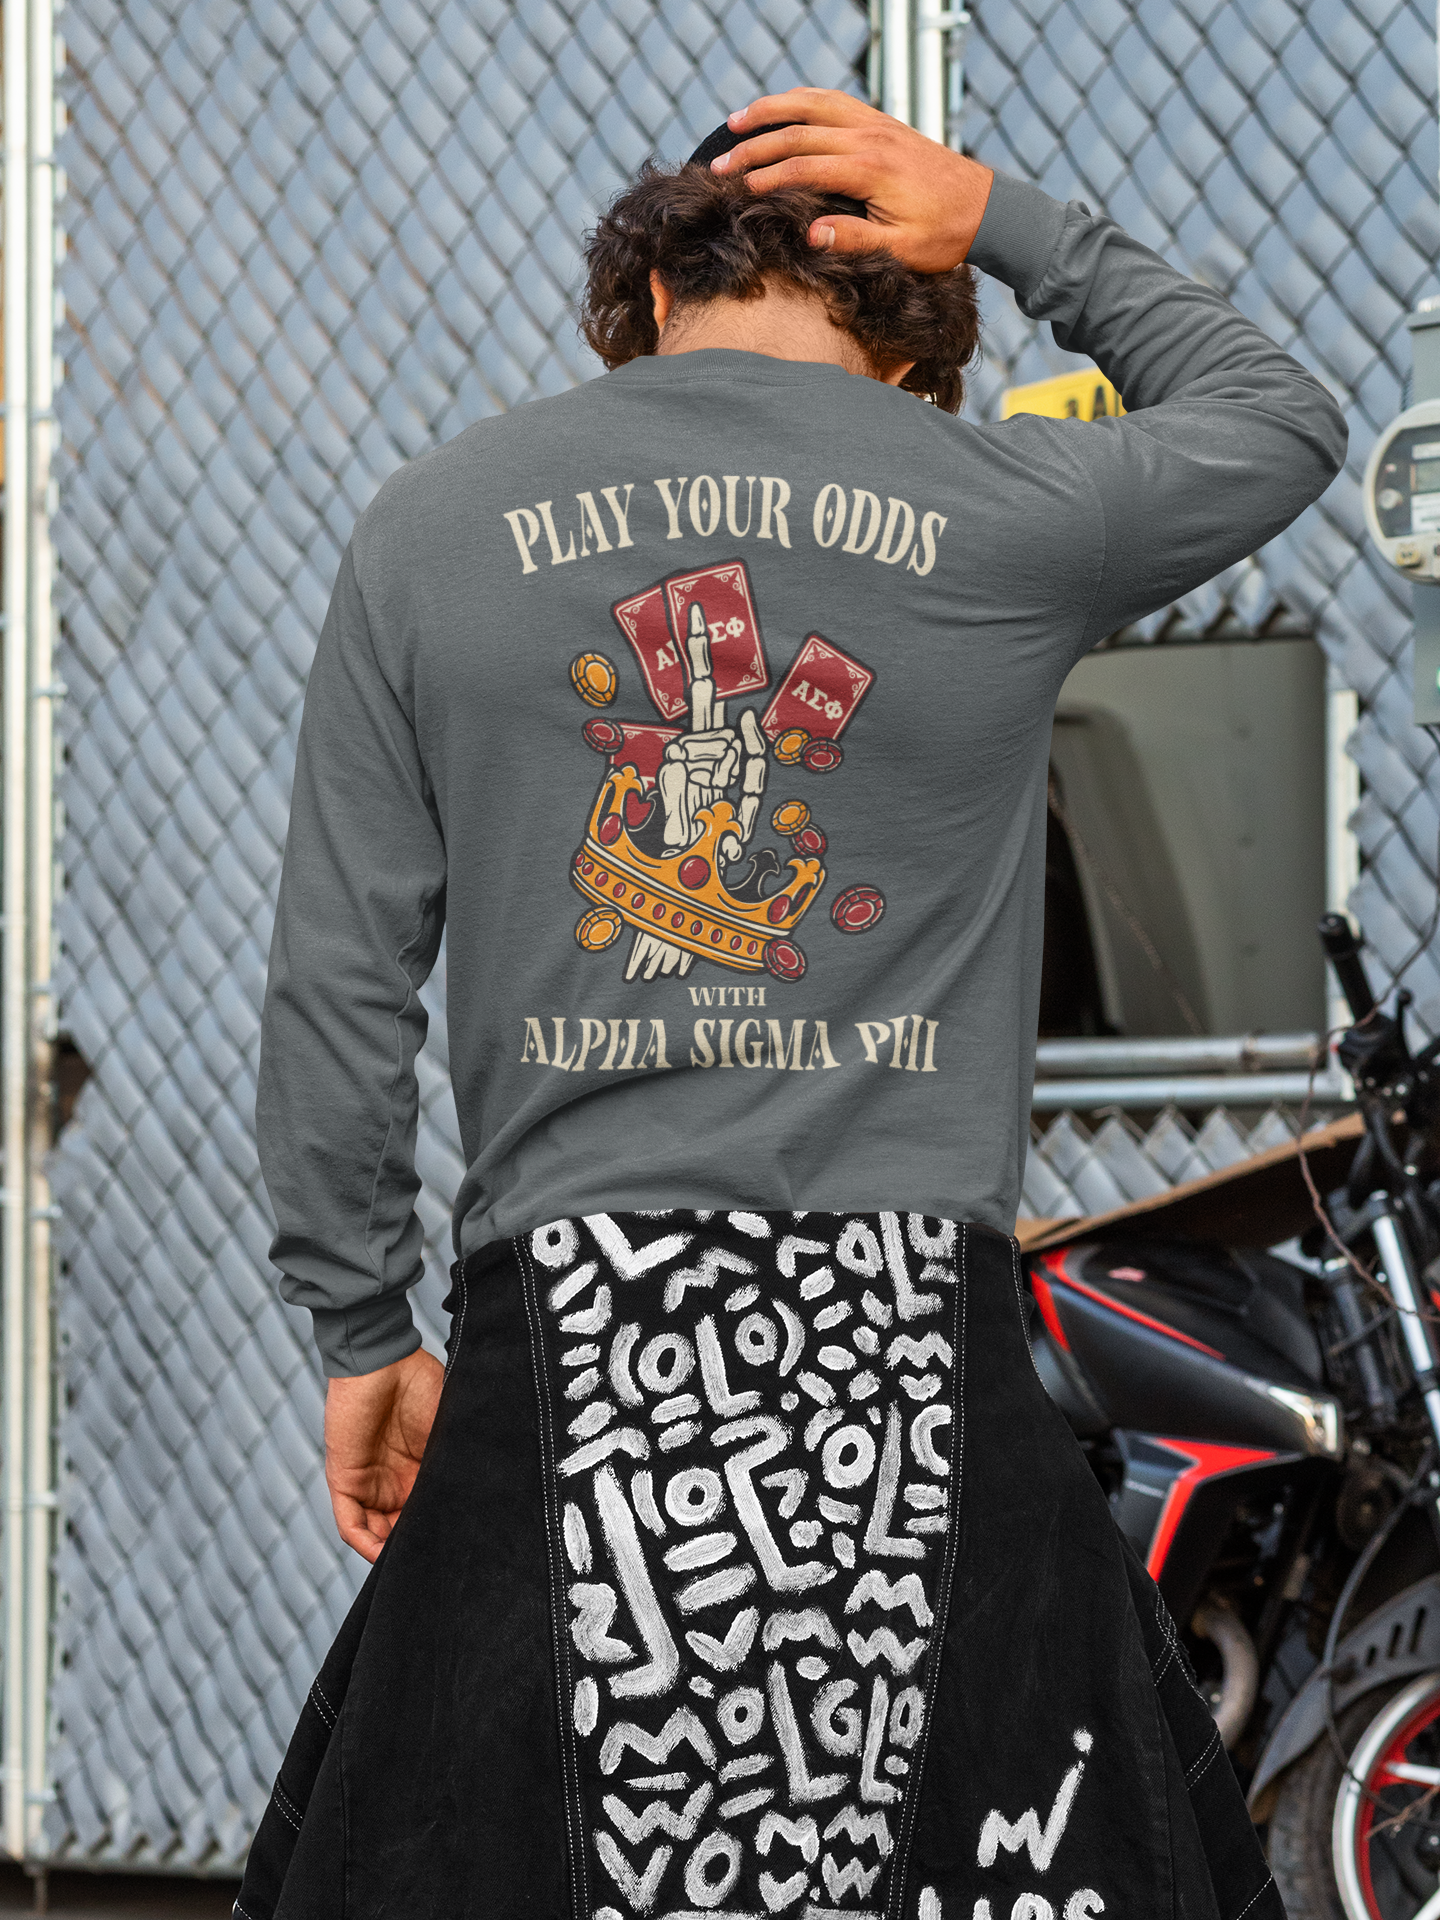 Alpha Sigma Phi Graphic Long Sleeve | Play Your Odds | Alpha Sigma Phi Long Sleeve Fraternity Shirt back model 